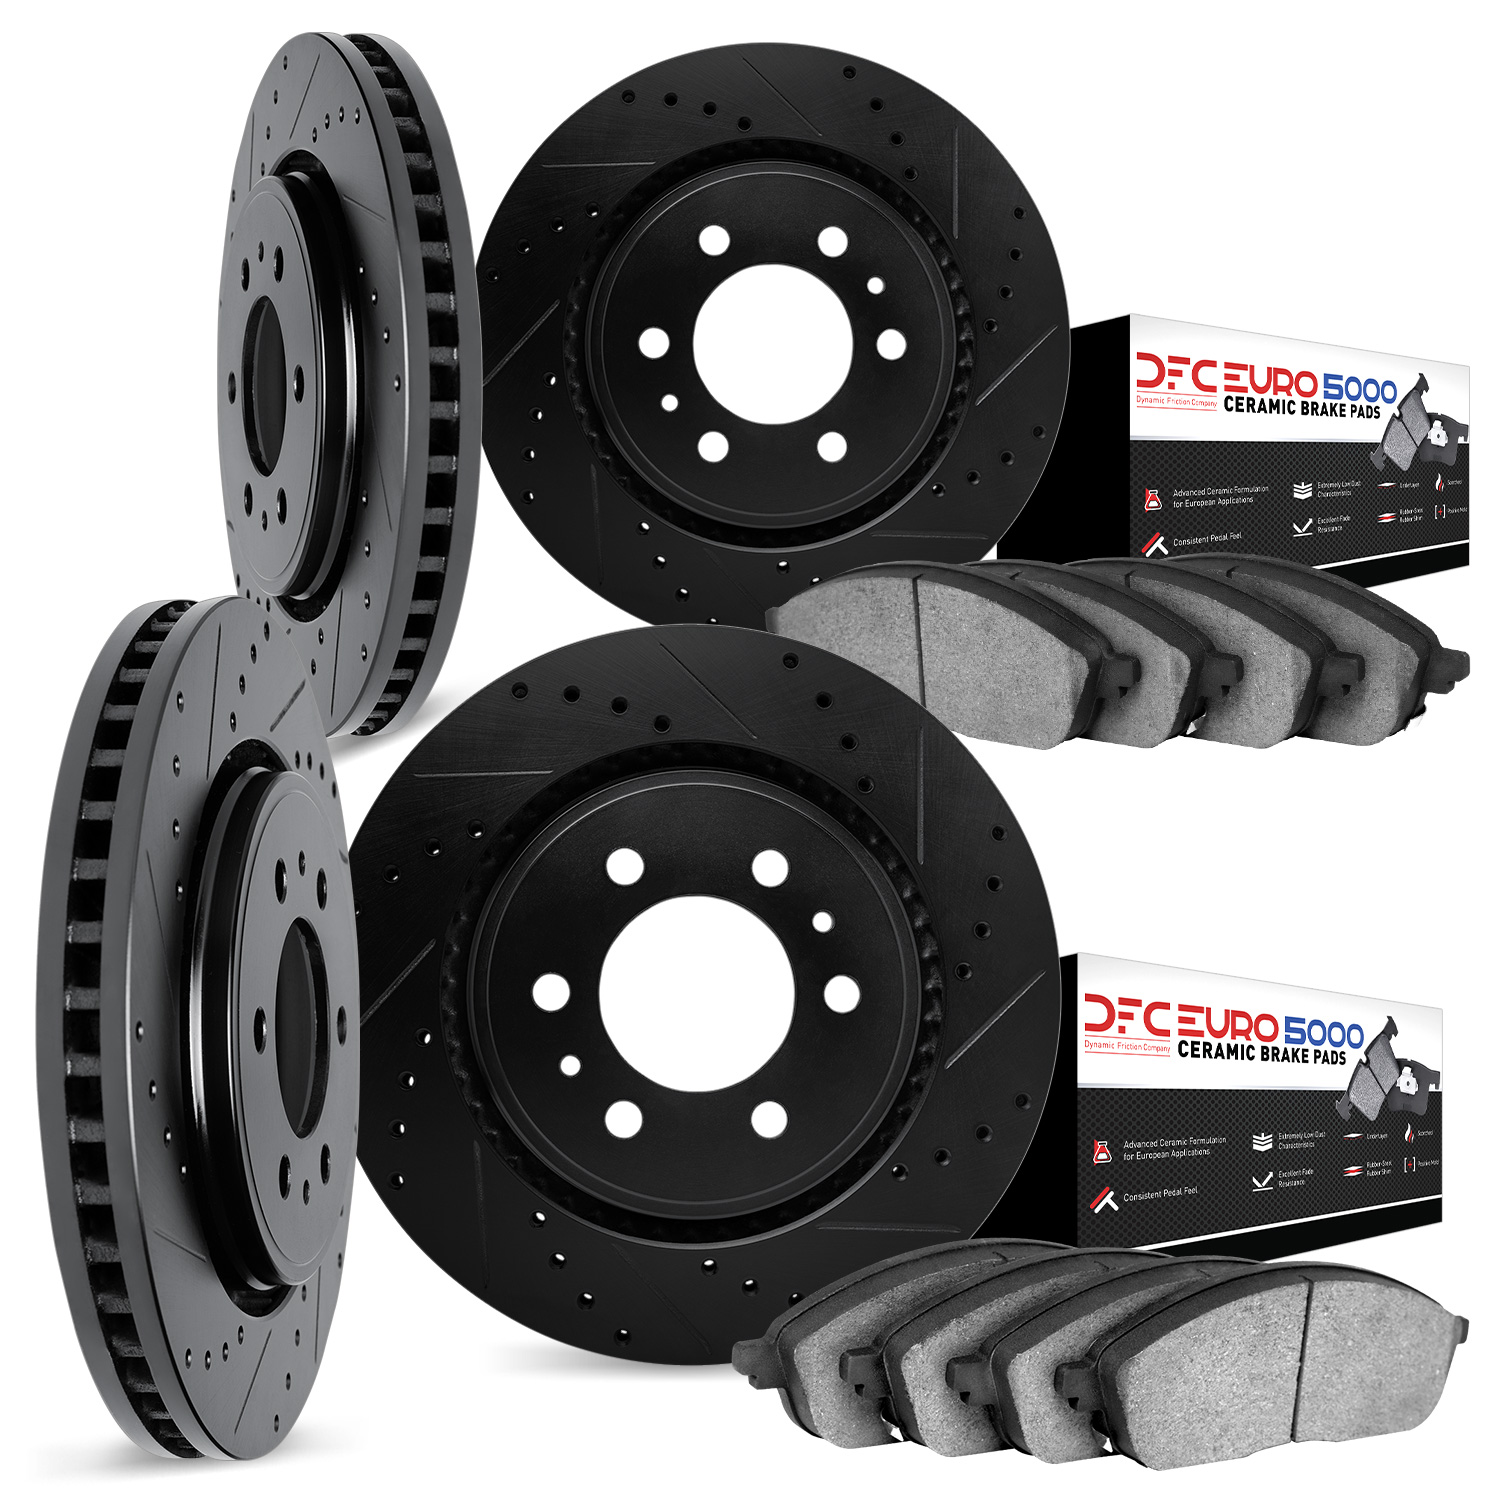 8604-48003 Drilled/Slotted Brake Rotors w/5000 Euro Ceramic Brake Pads Kit [Black], 2006-2009 GM, Position: Front and Rear